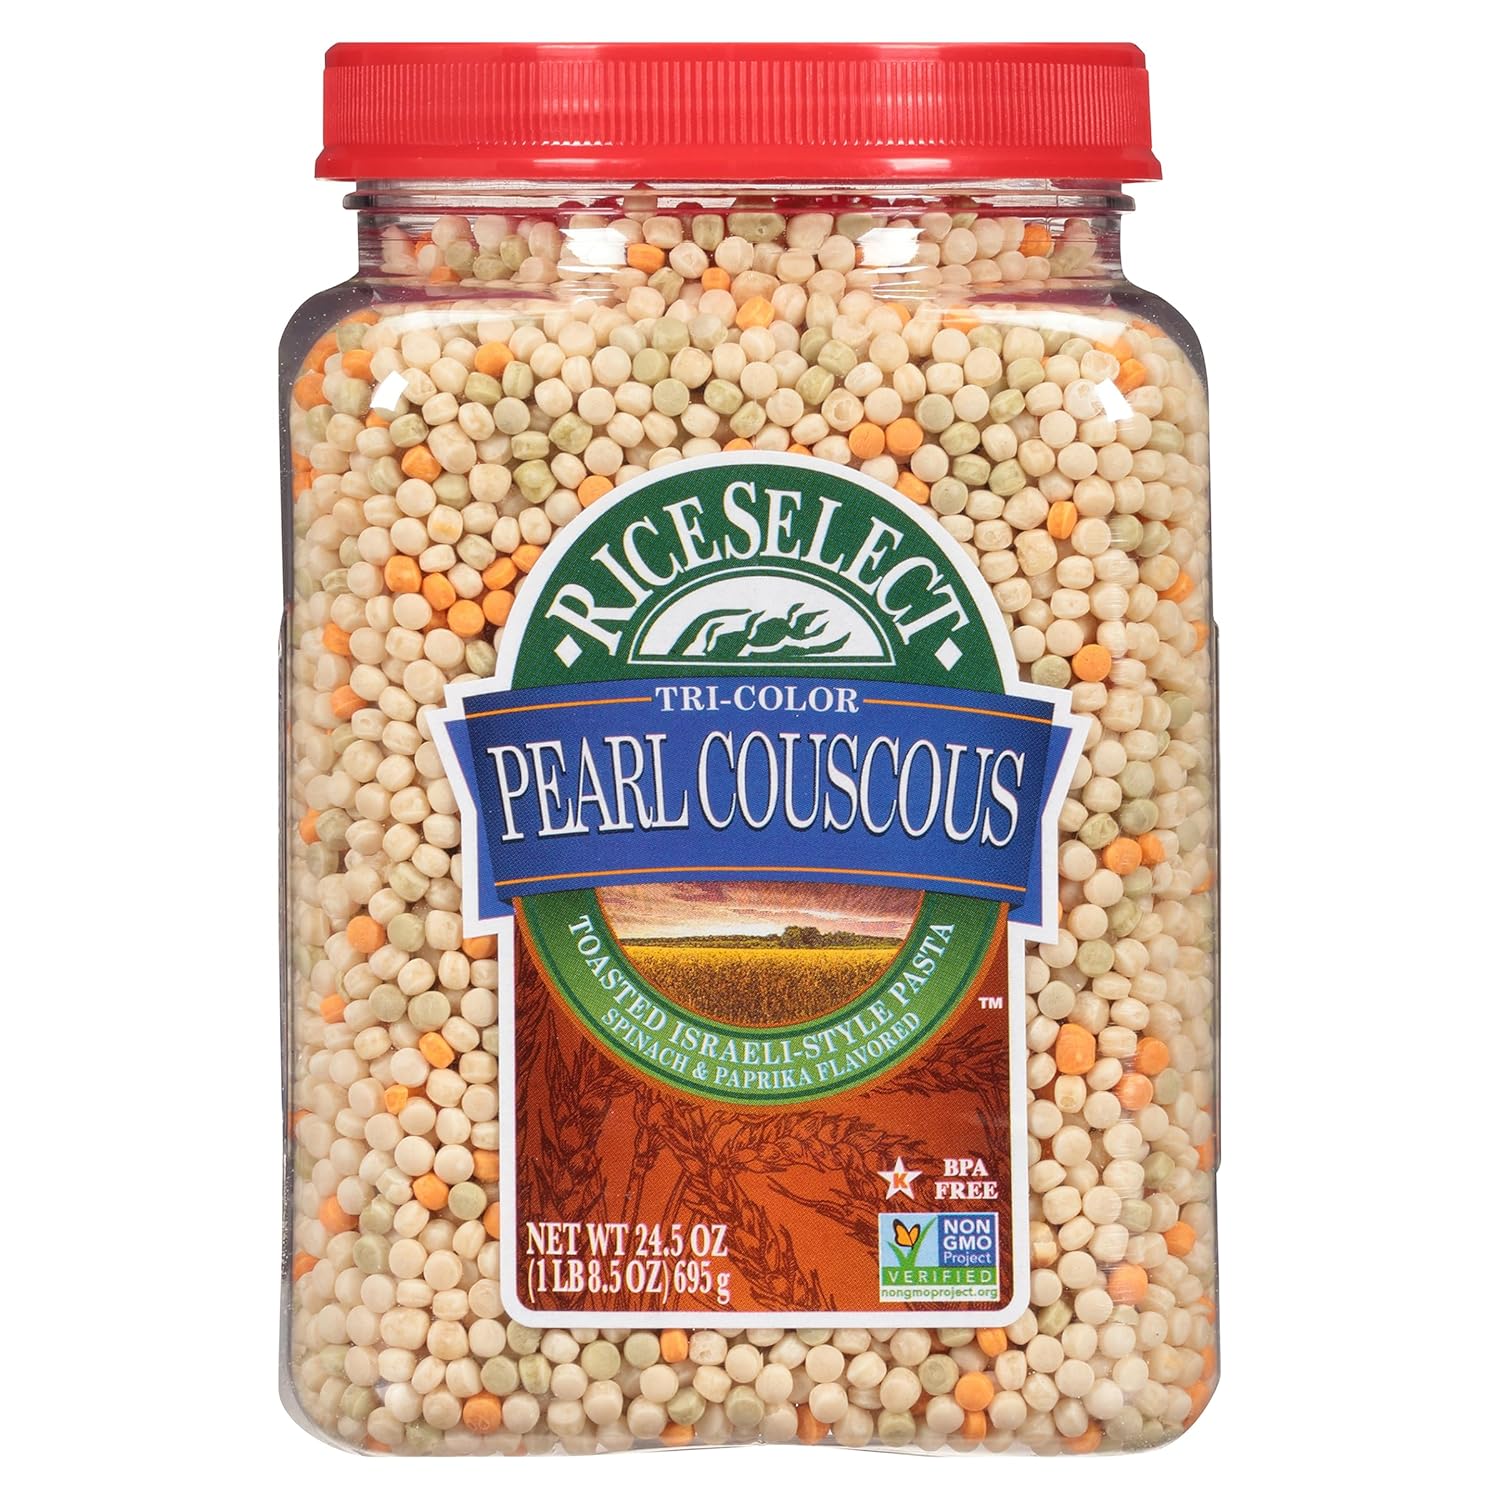 RiceSelect Tri-Color Pearl Couscous, Toasted Israeli-Style Pasta, Spinach and Paprika Flavored, 24.5 Ounce Jar (Pack of 1)